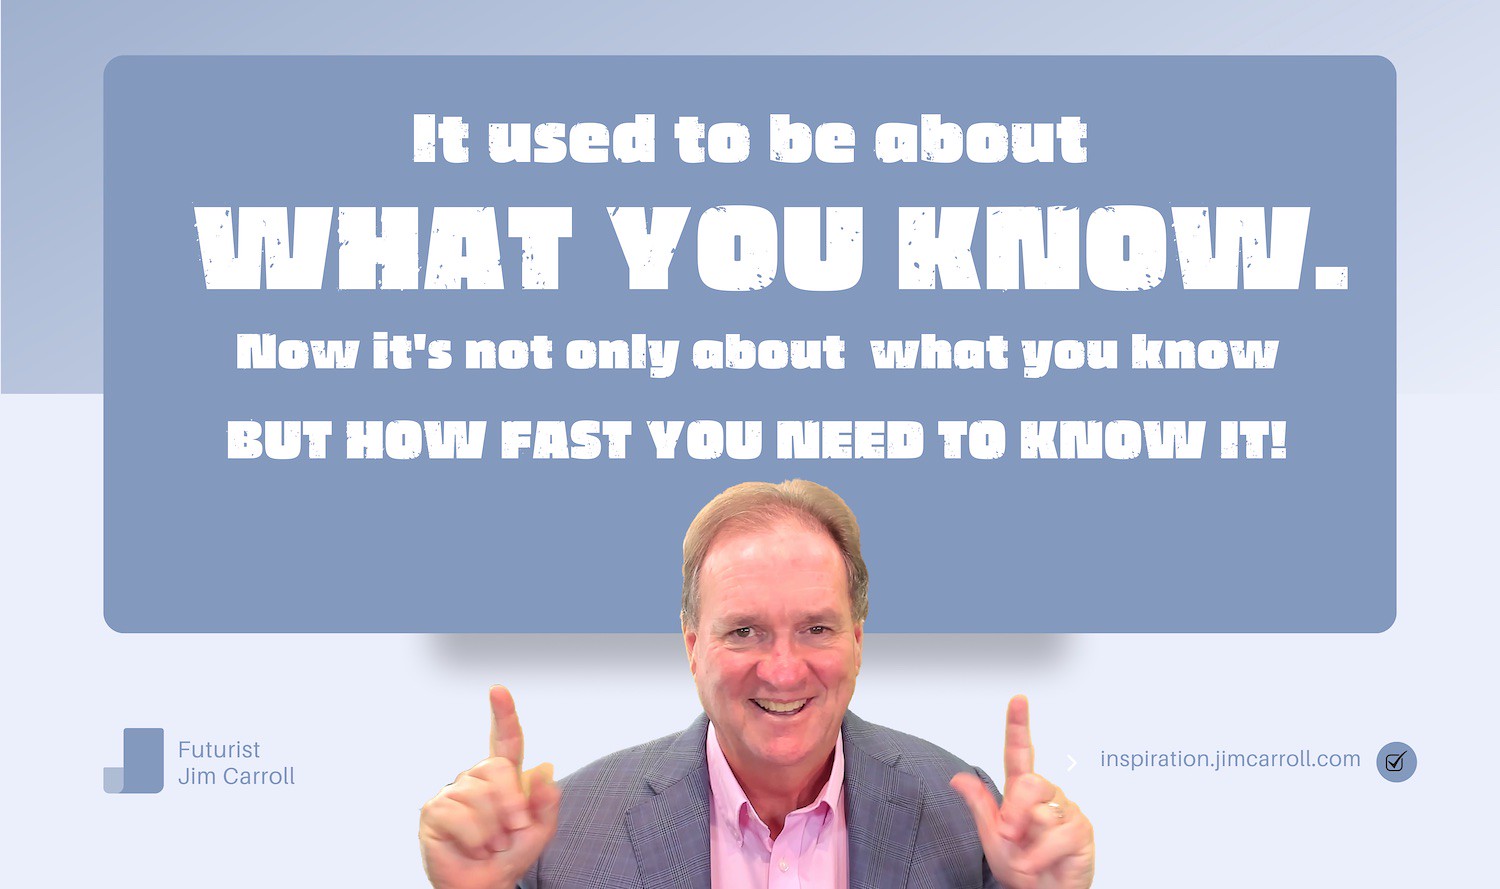 "It used to be about what you know. Now it's not only about what you know, but how fast you need to know it!" - Futurist Jim Carroll